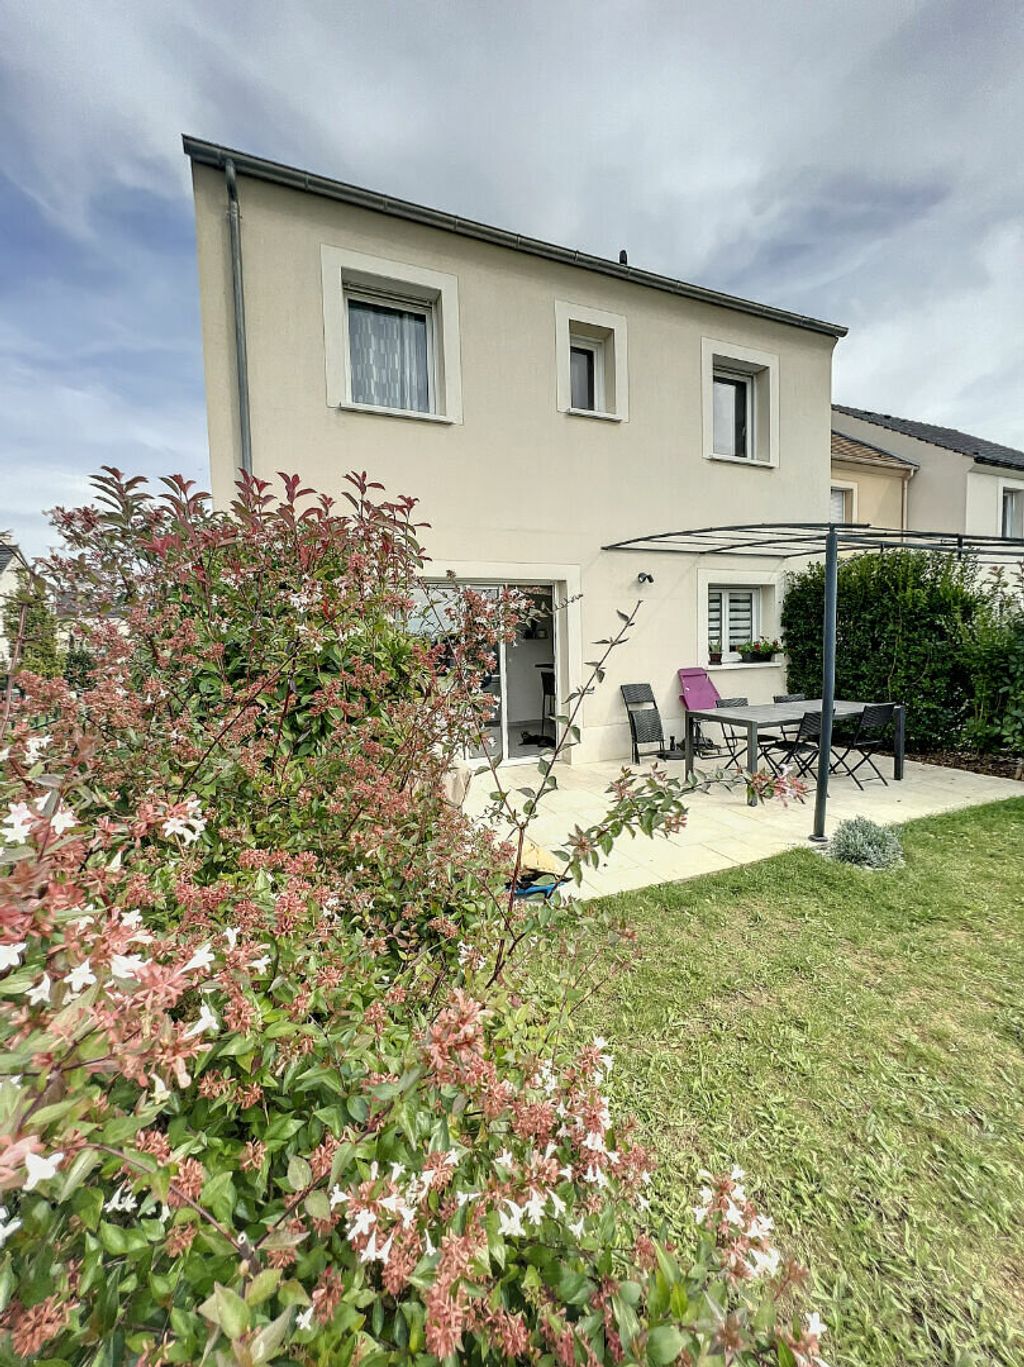 Achat maison 4 chambre(s) - Clairefontaine-en-Yvelines